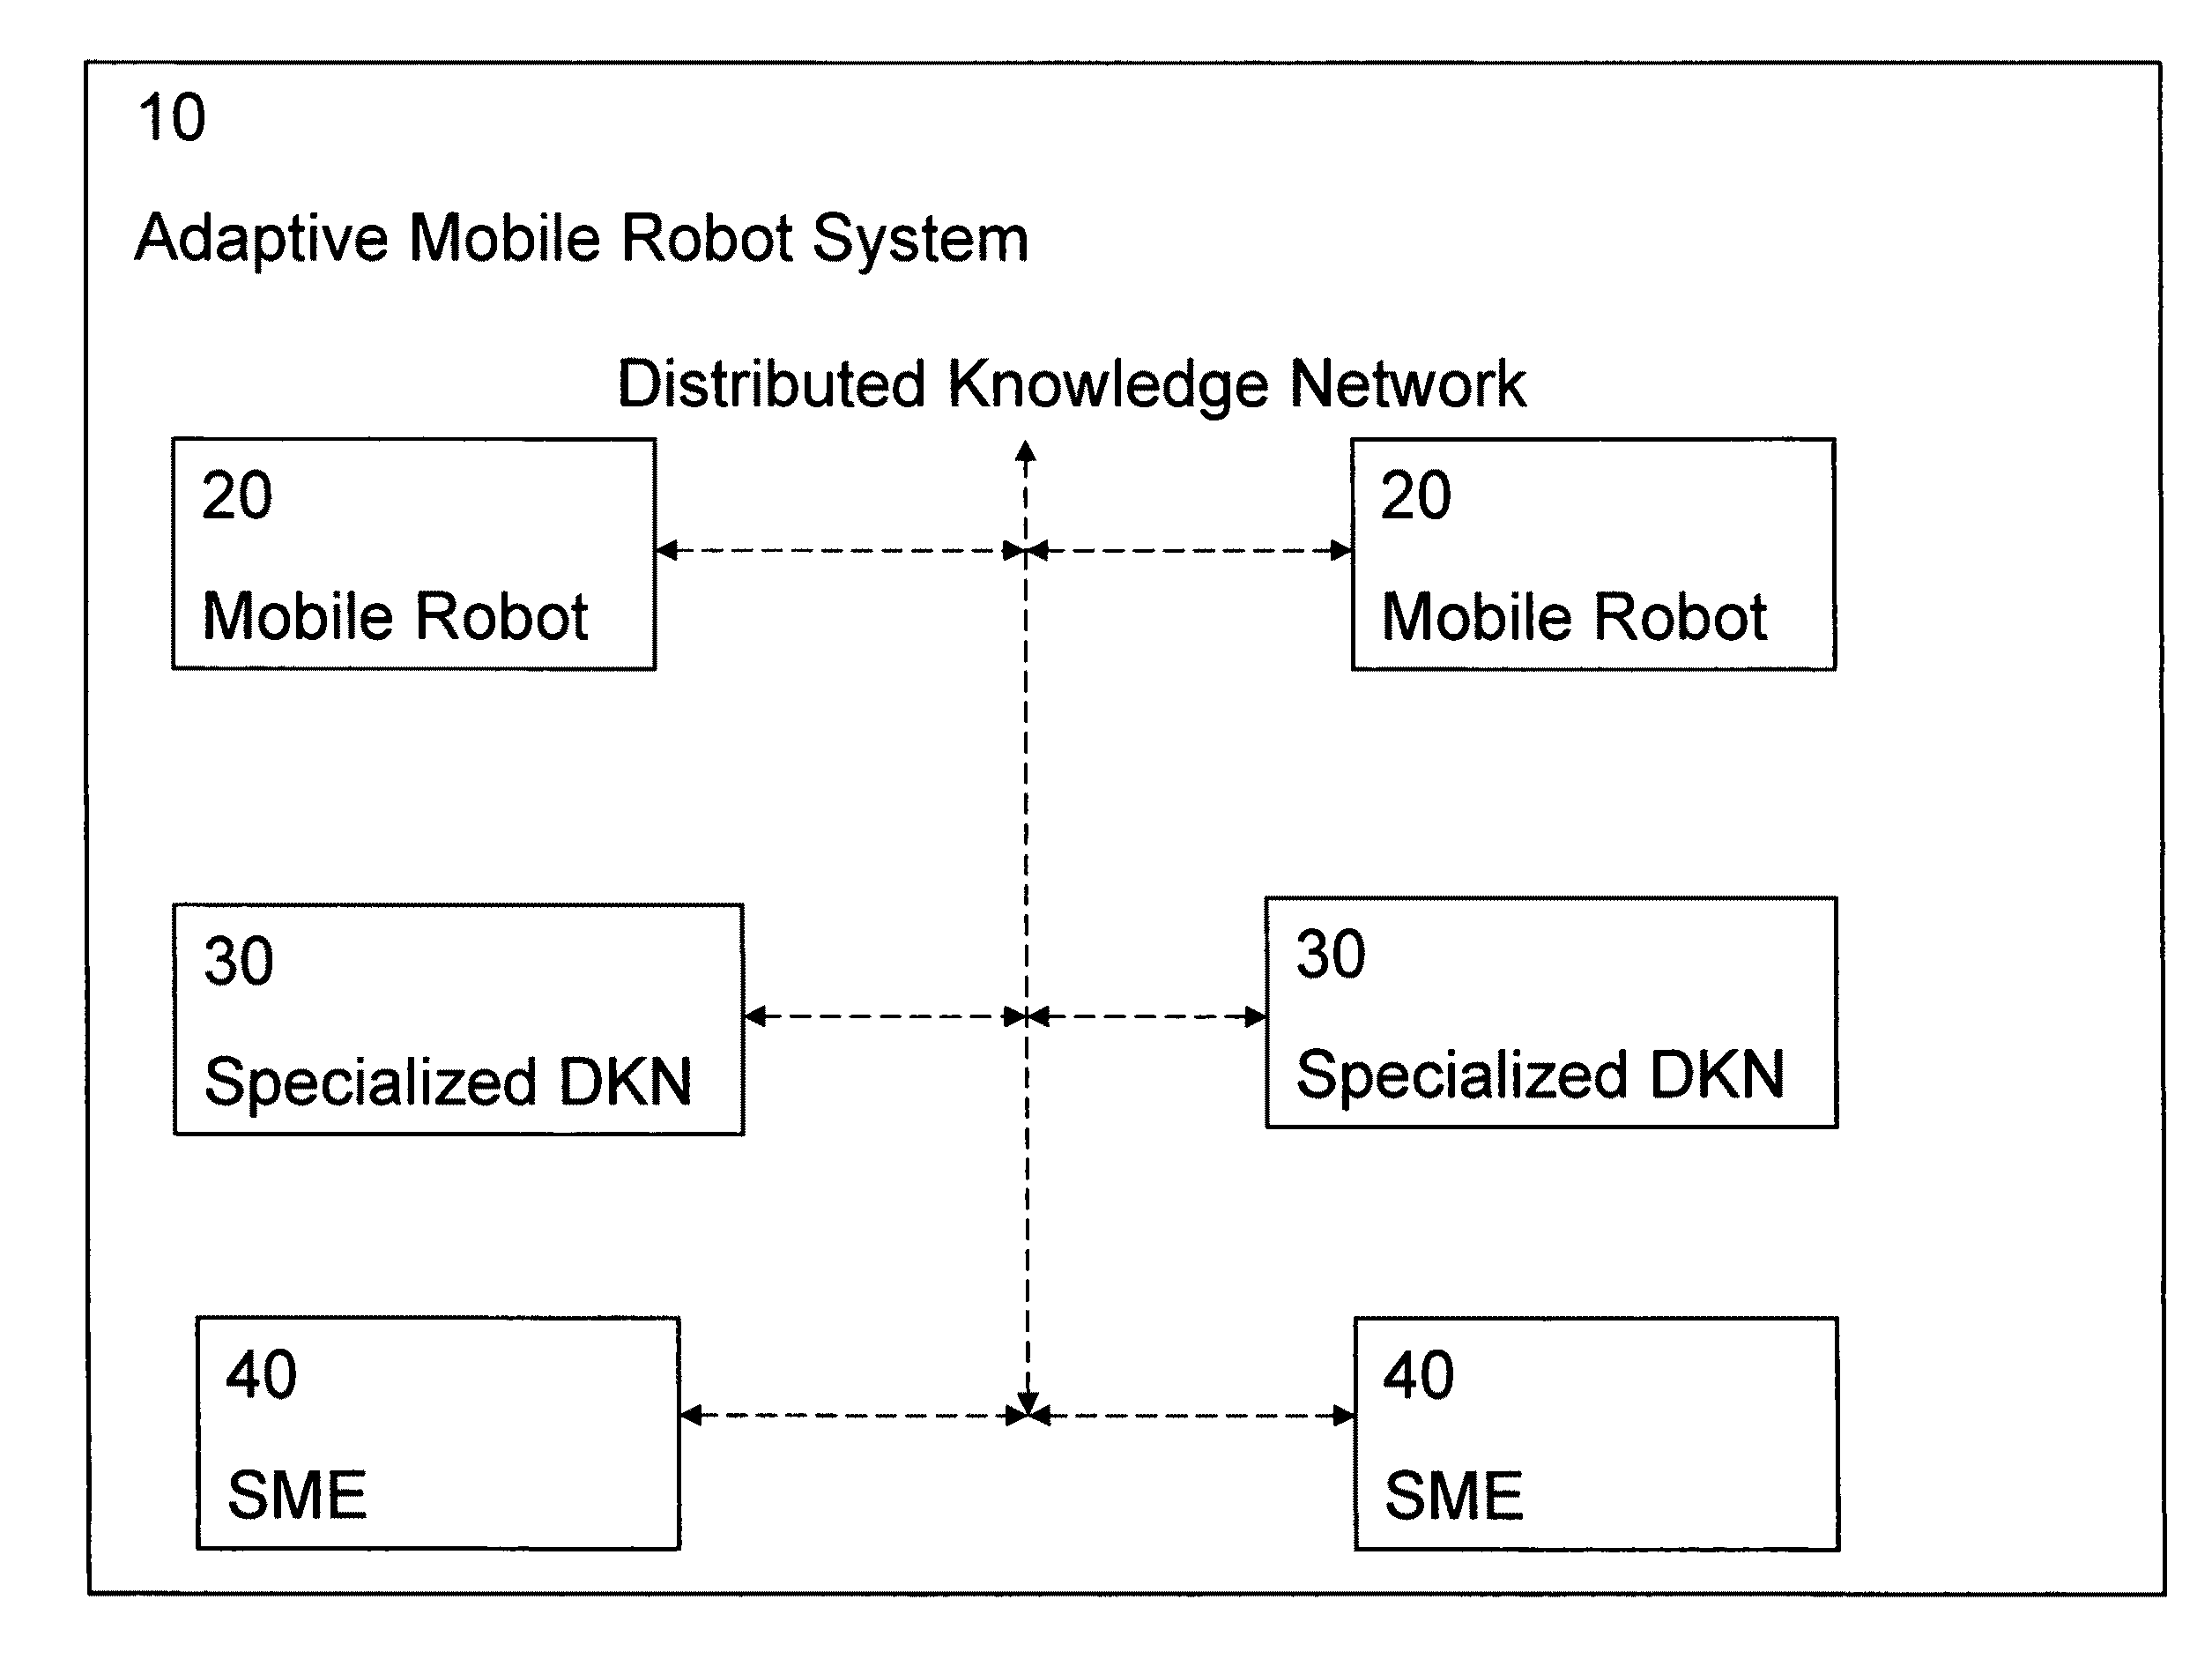 Adaptive mobile robot system with knowledge-driven architecture